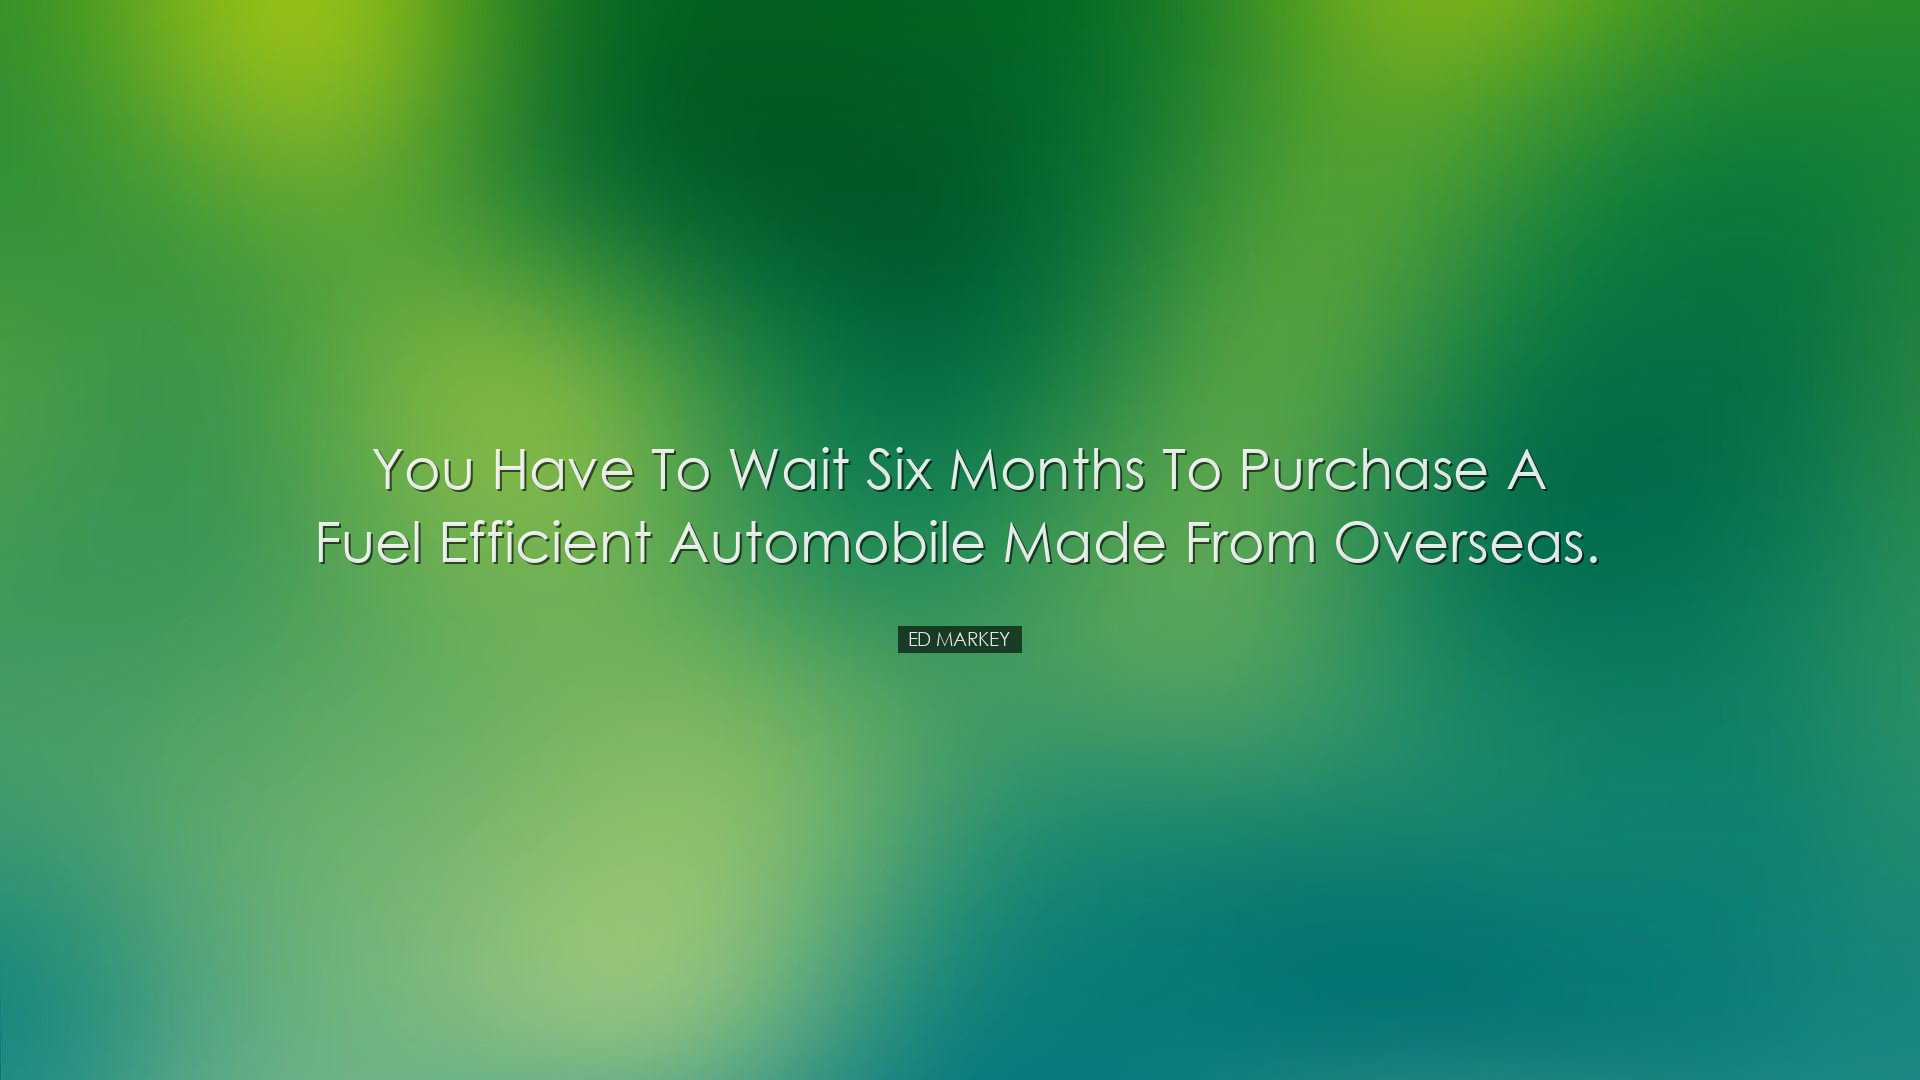 You have to wait six months to purchase a fuel efficient automobil